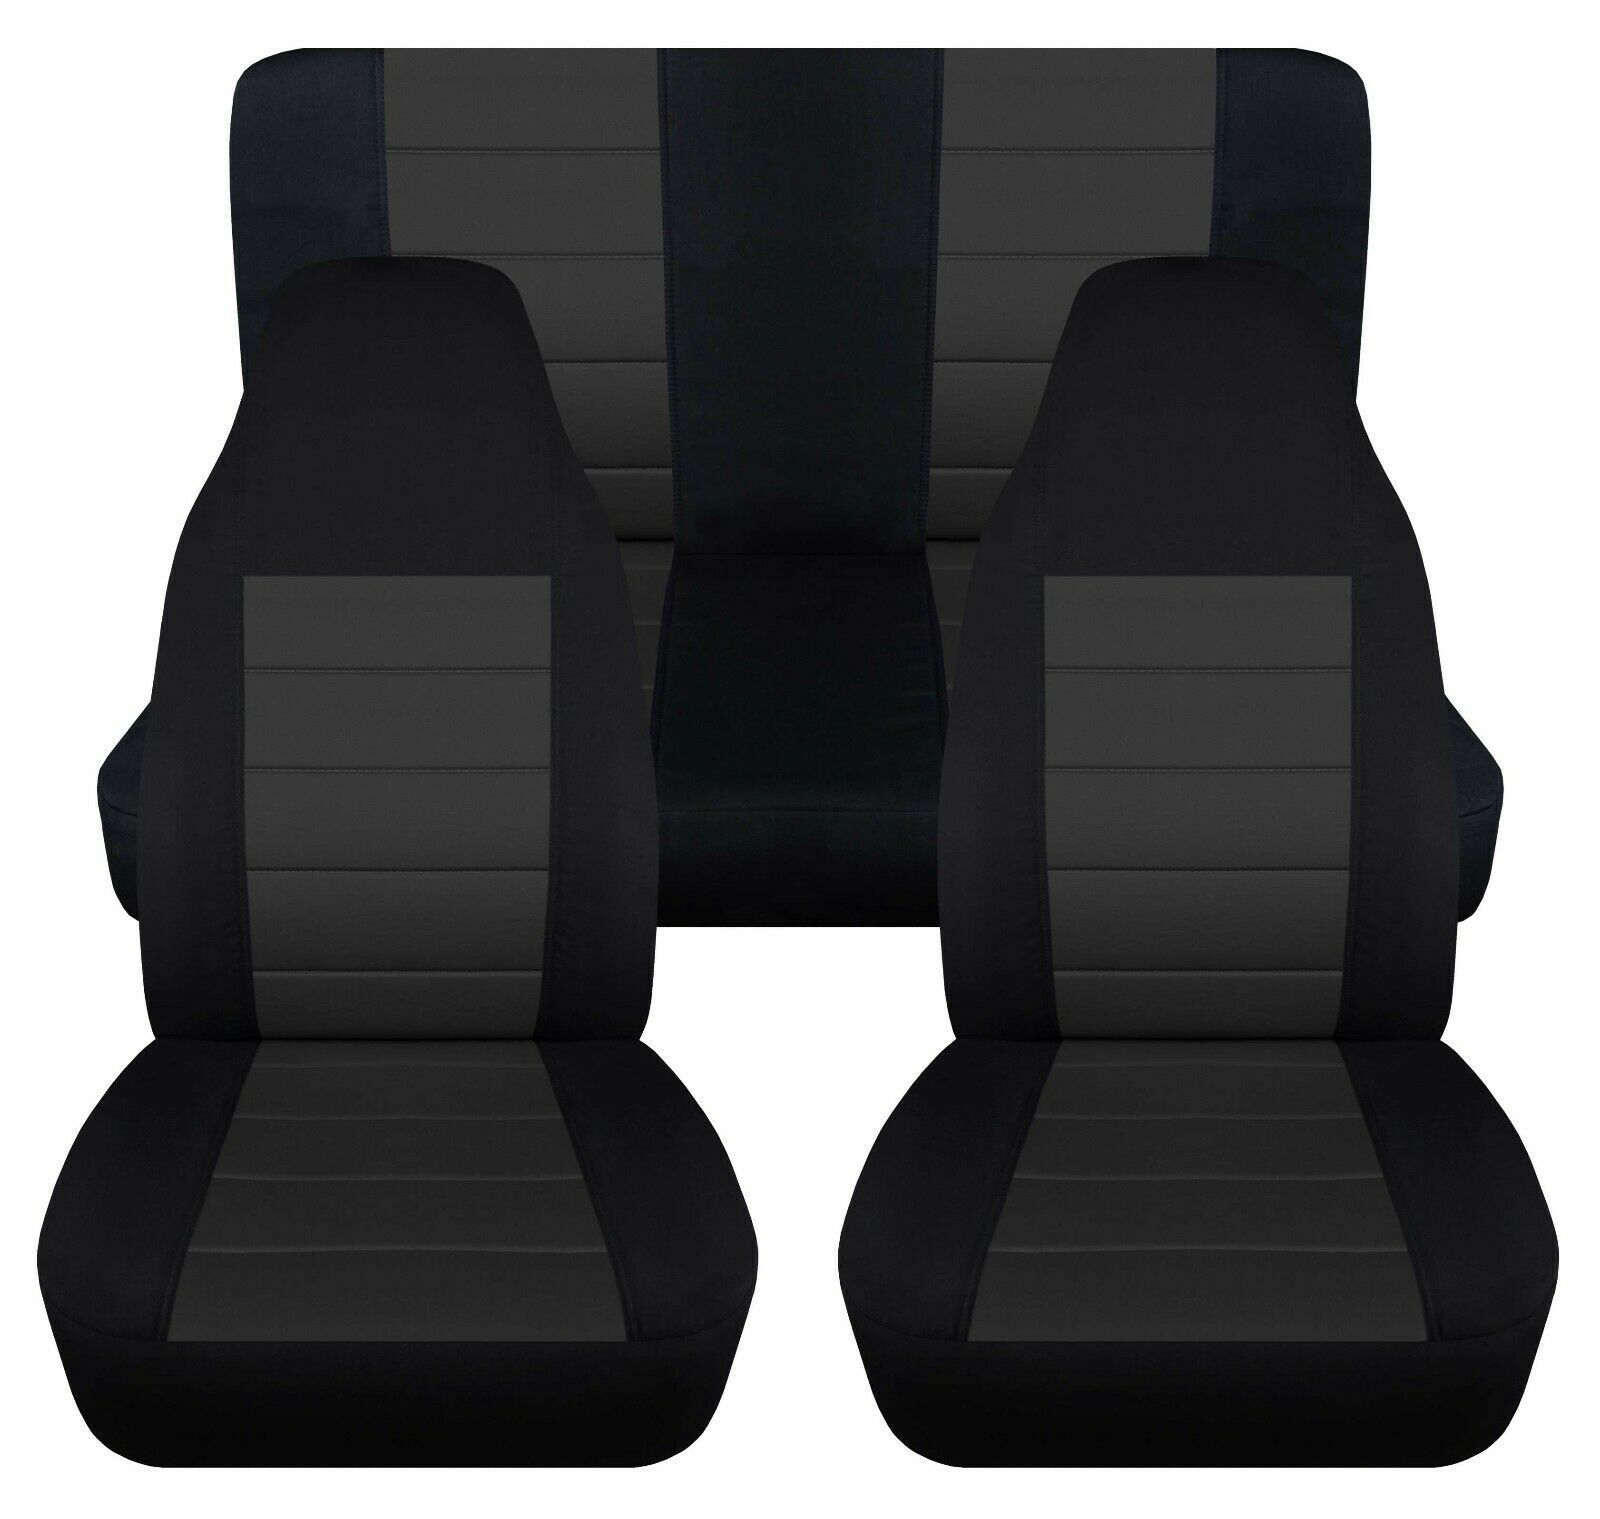 Designcovers - Front and rear car seat covers fits ford f150 truck 1997 to 2003 black-charcoal